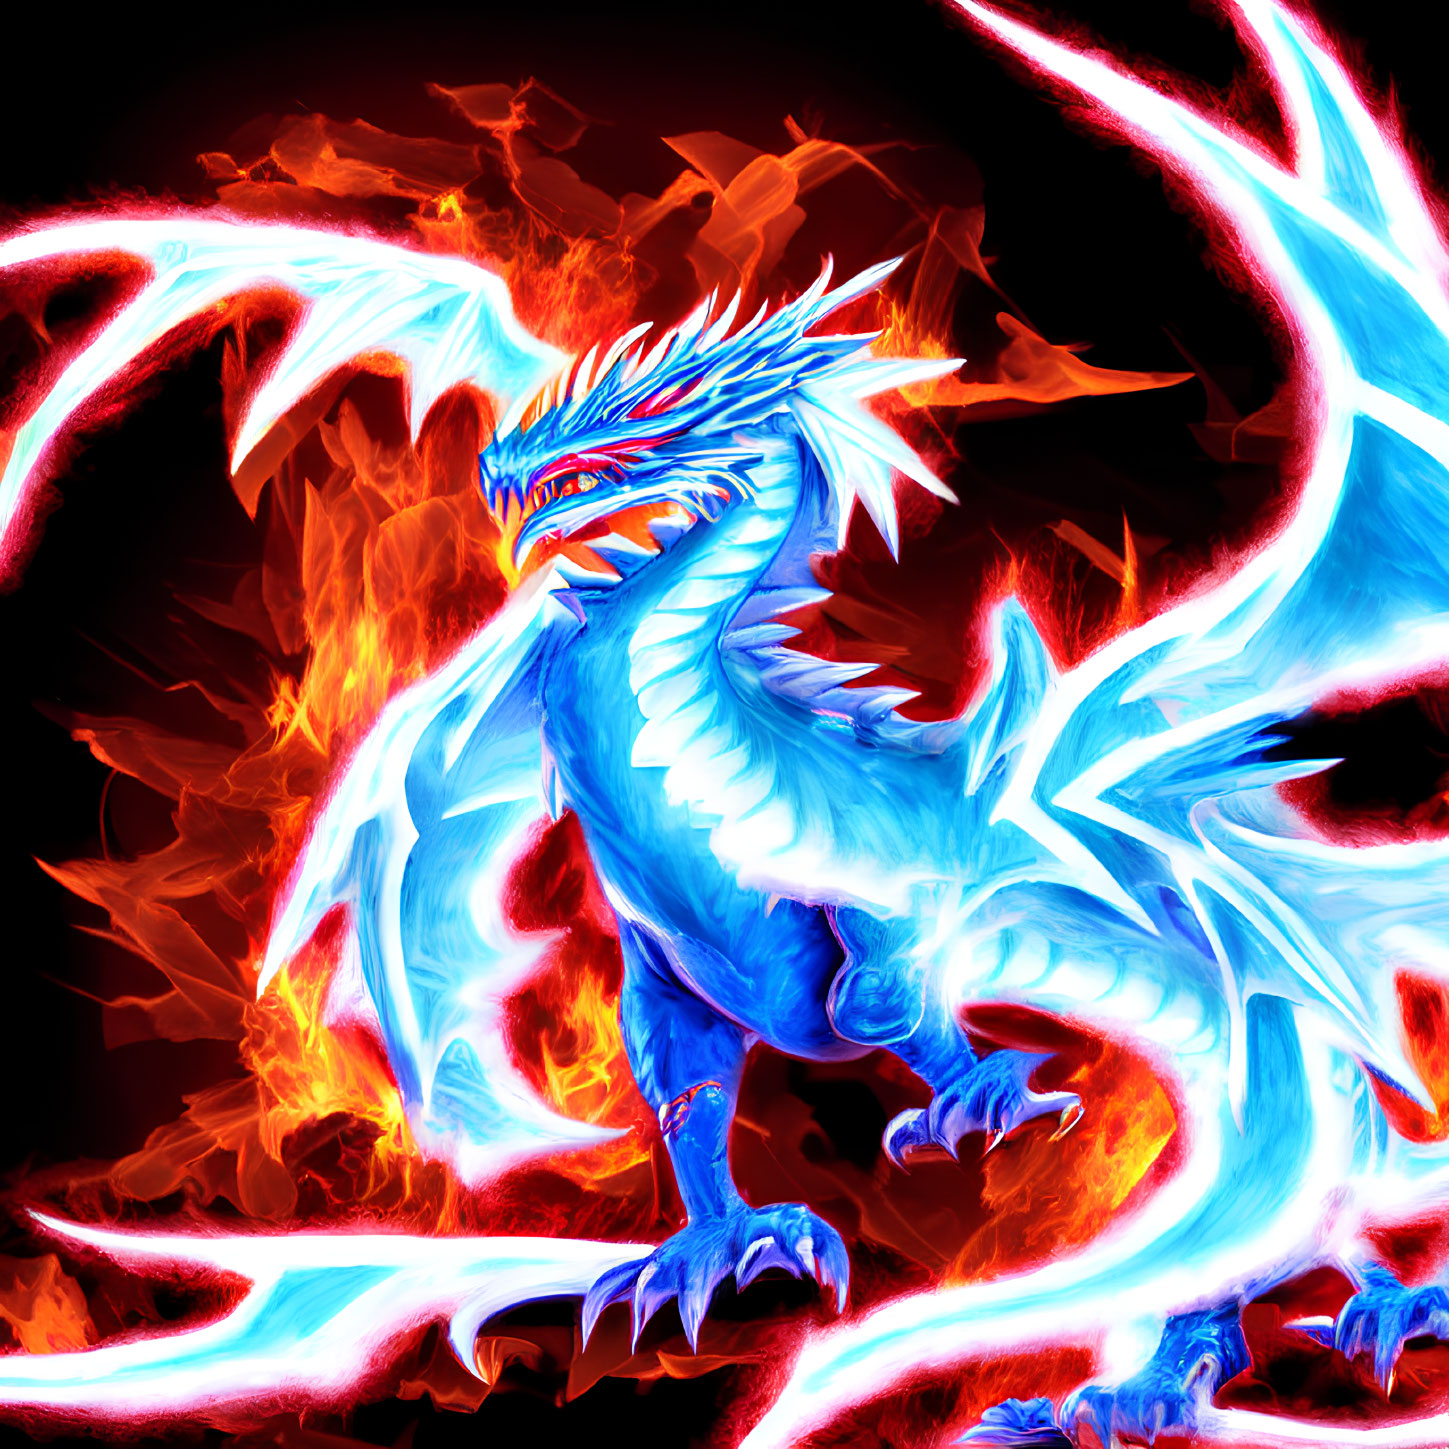 Colorful Dragon Illustration Surrounded by Flames